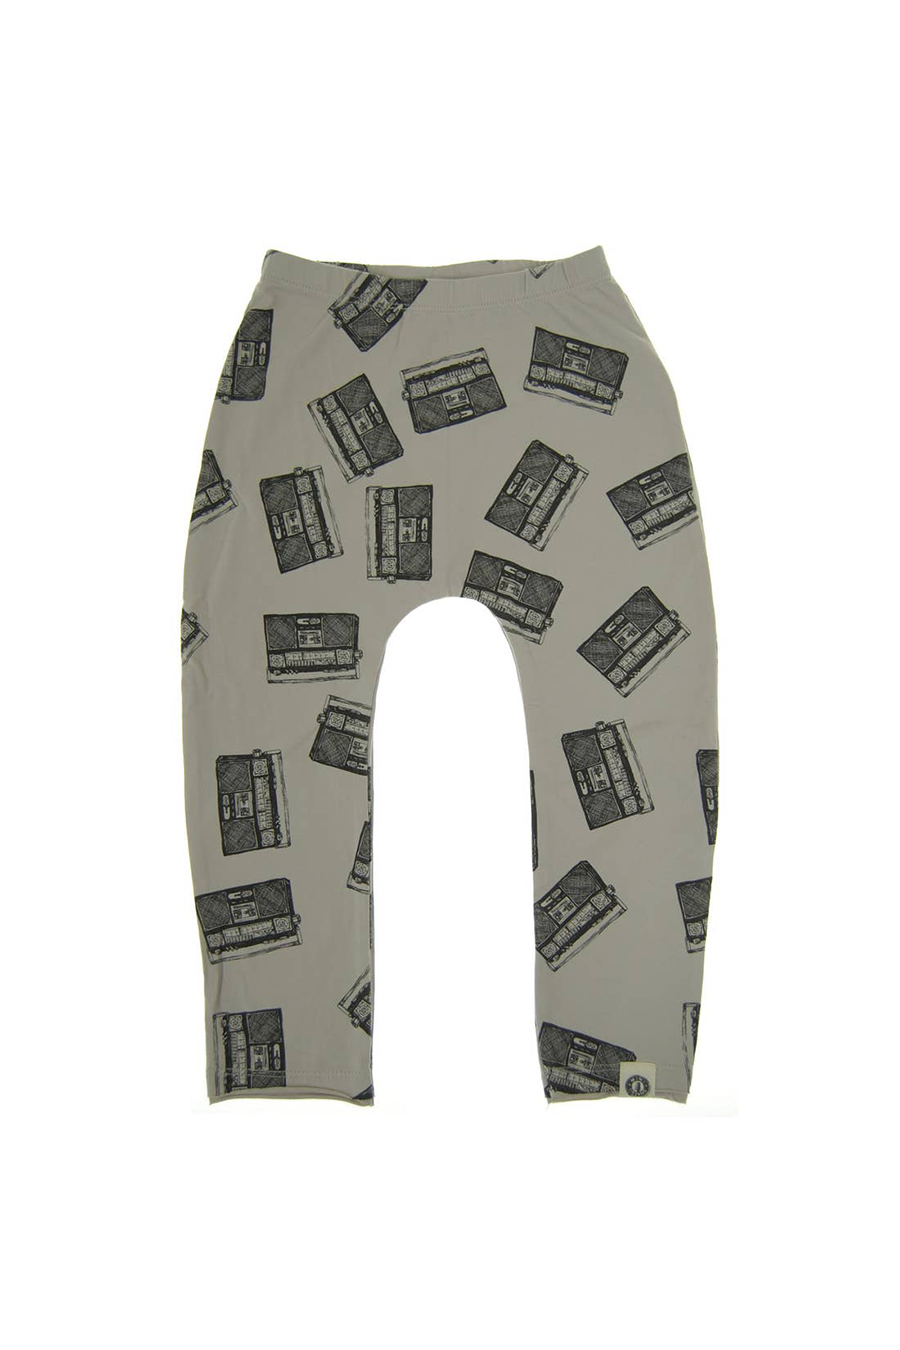 Allover Boom Box Kids Joggers | Grey - Main Image Number 1 of 1